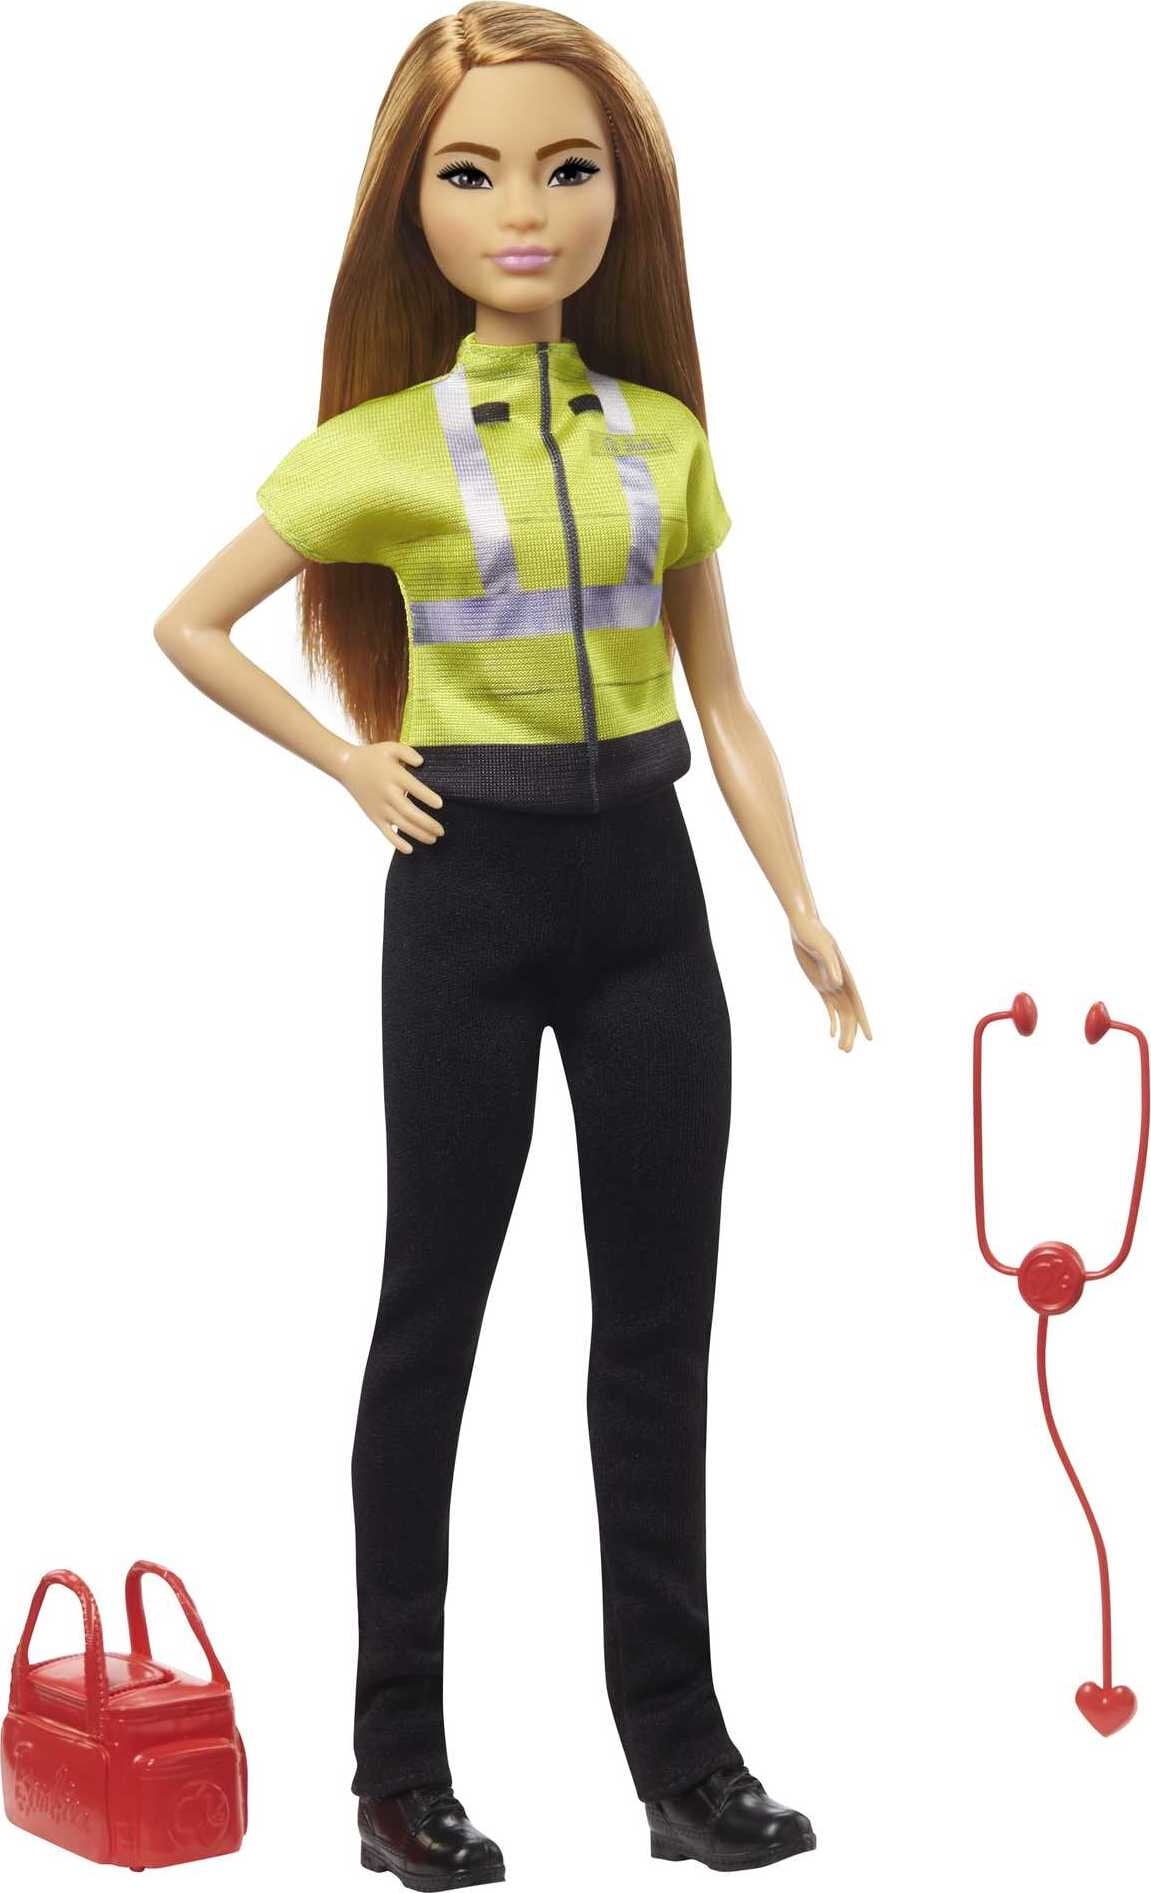 Toy New Toy Mattel Pilot Doll Barbie Paper Doll 